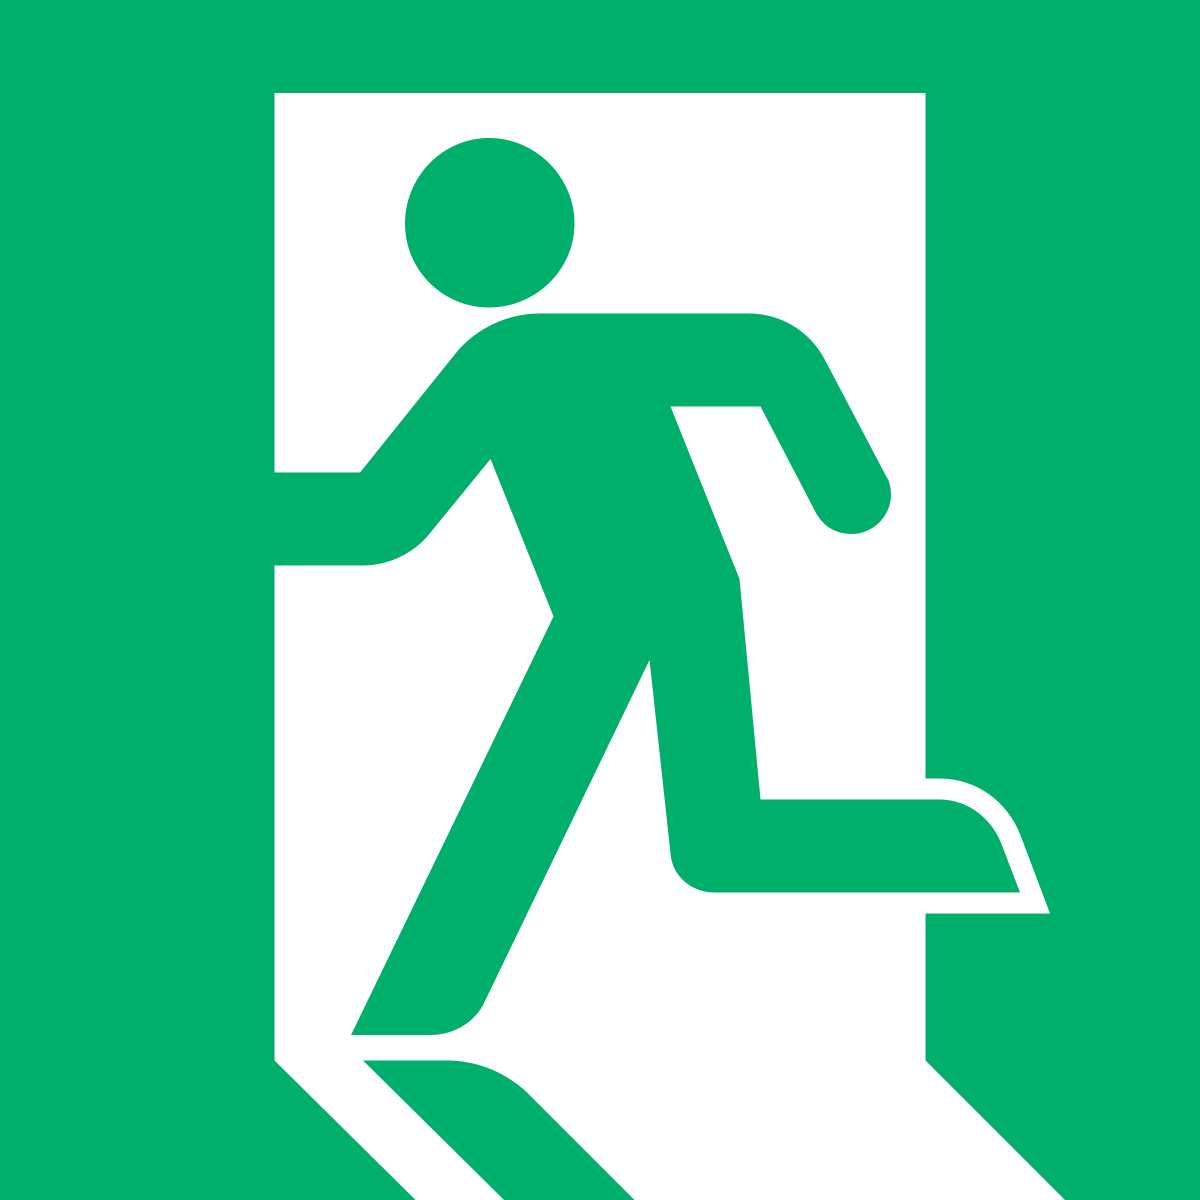 File:Emergency Exit ISO Pictogram (green).svg - Wikipedia